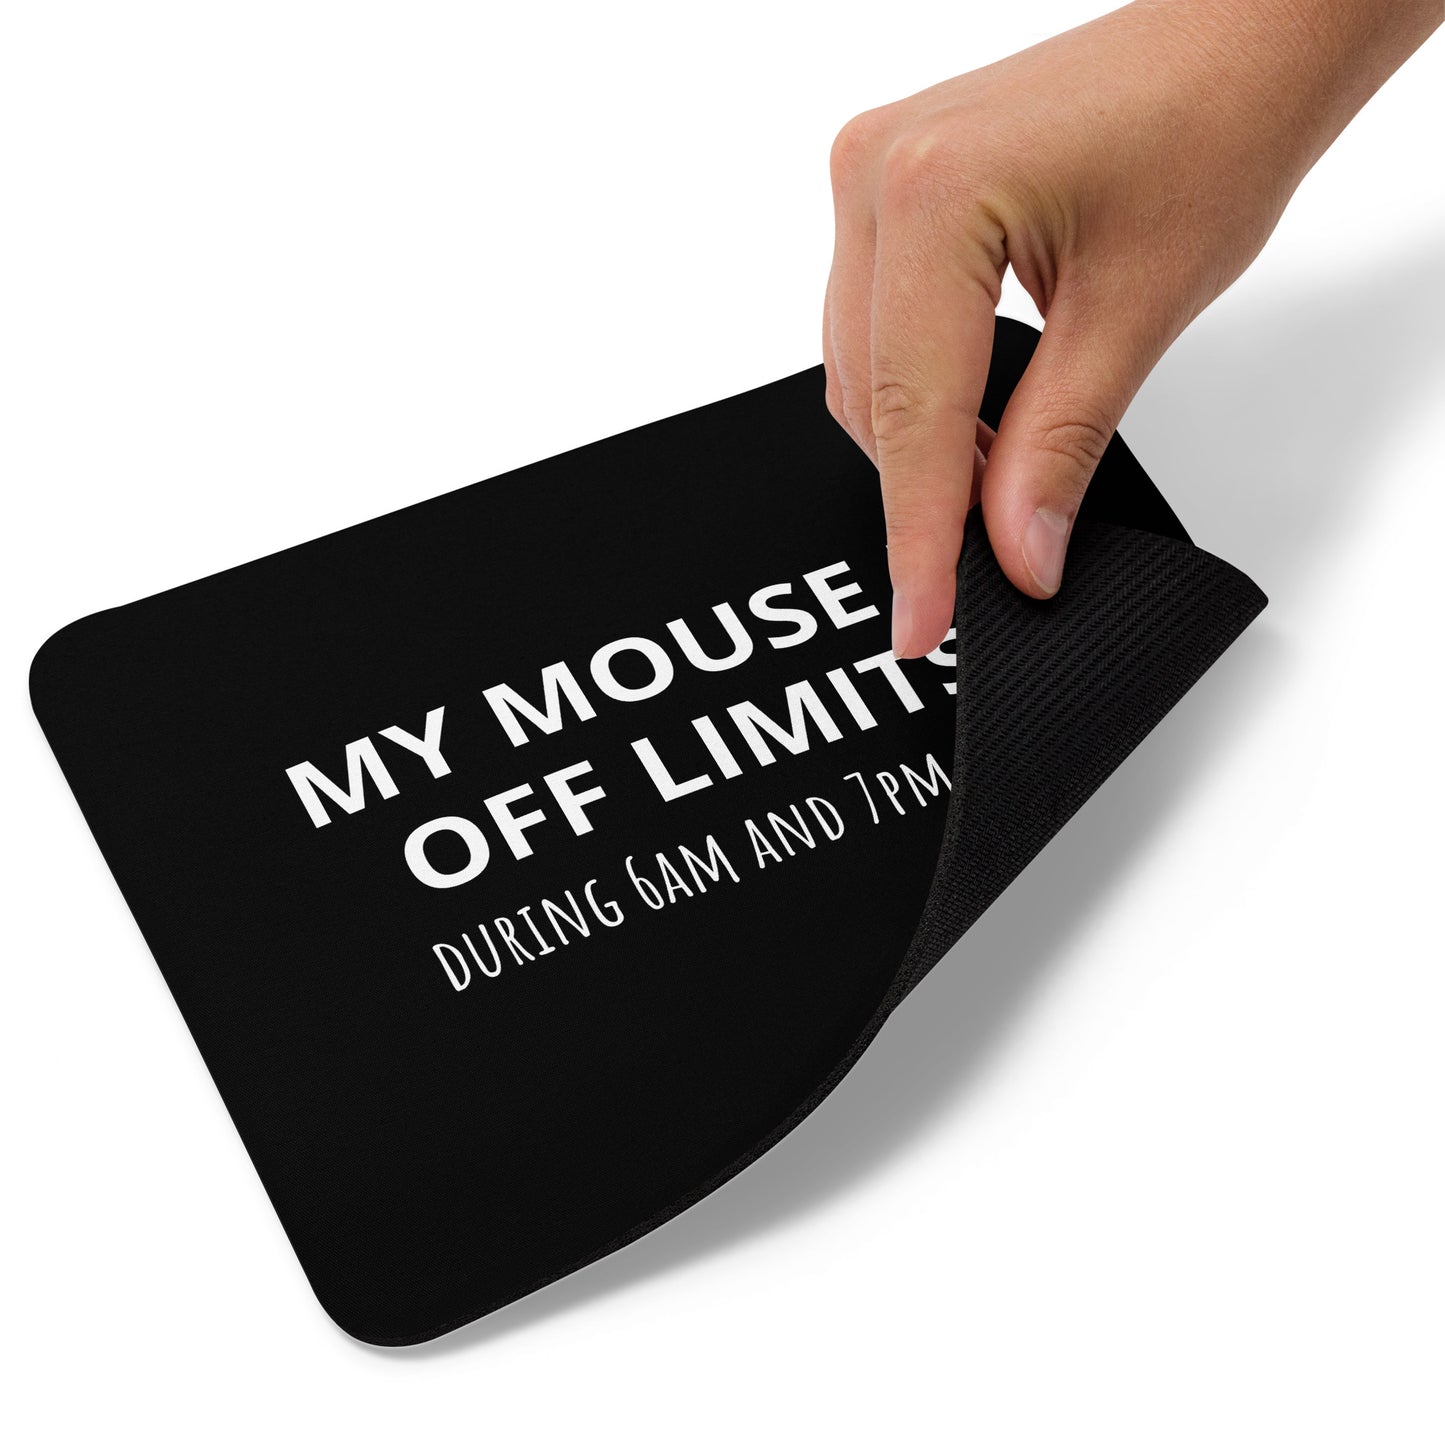 Mouse pad - off limits